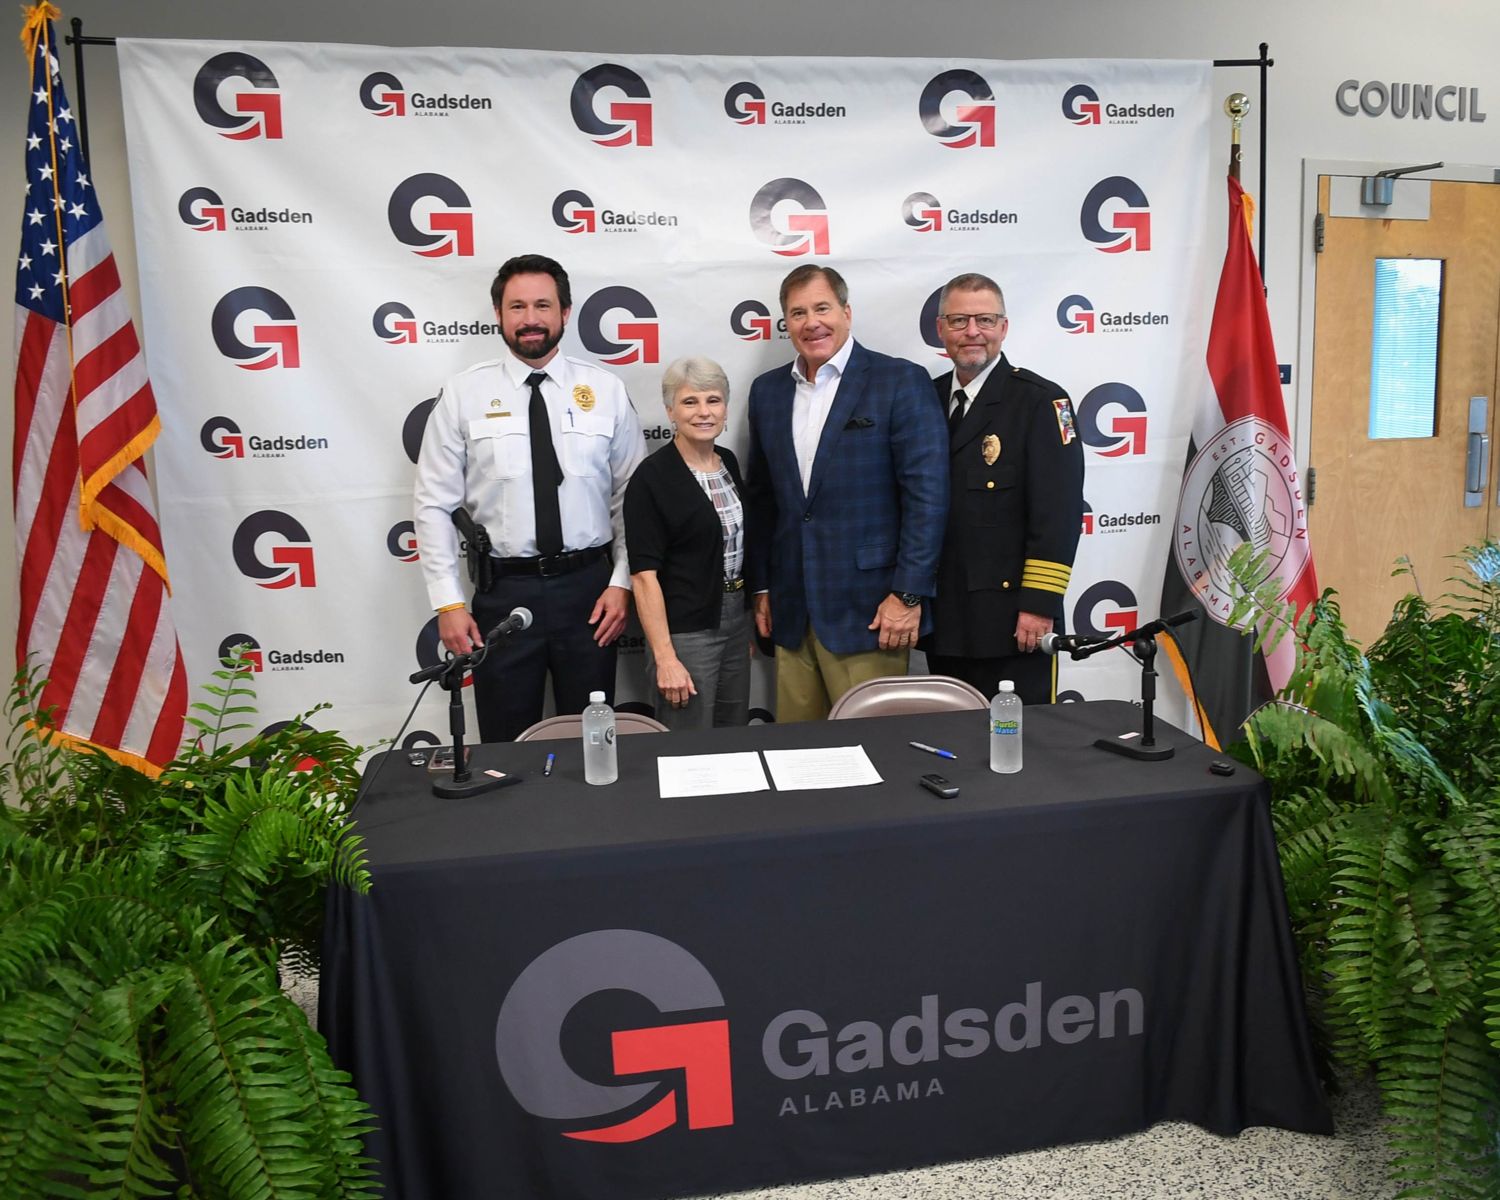 Left to right: Gadsden State police chief Jay Freeman, Gadsden State president Dr. Kathy Murphy, City of Gadsden mayor Craig Ford and Gadsden Police Department chief Lamar Jaggears after the signing of a Memorandum of Understanding between the police departments. 